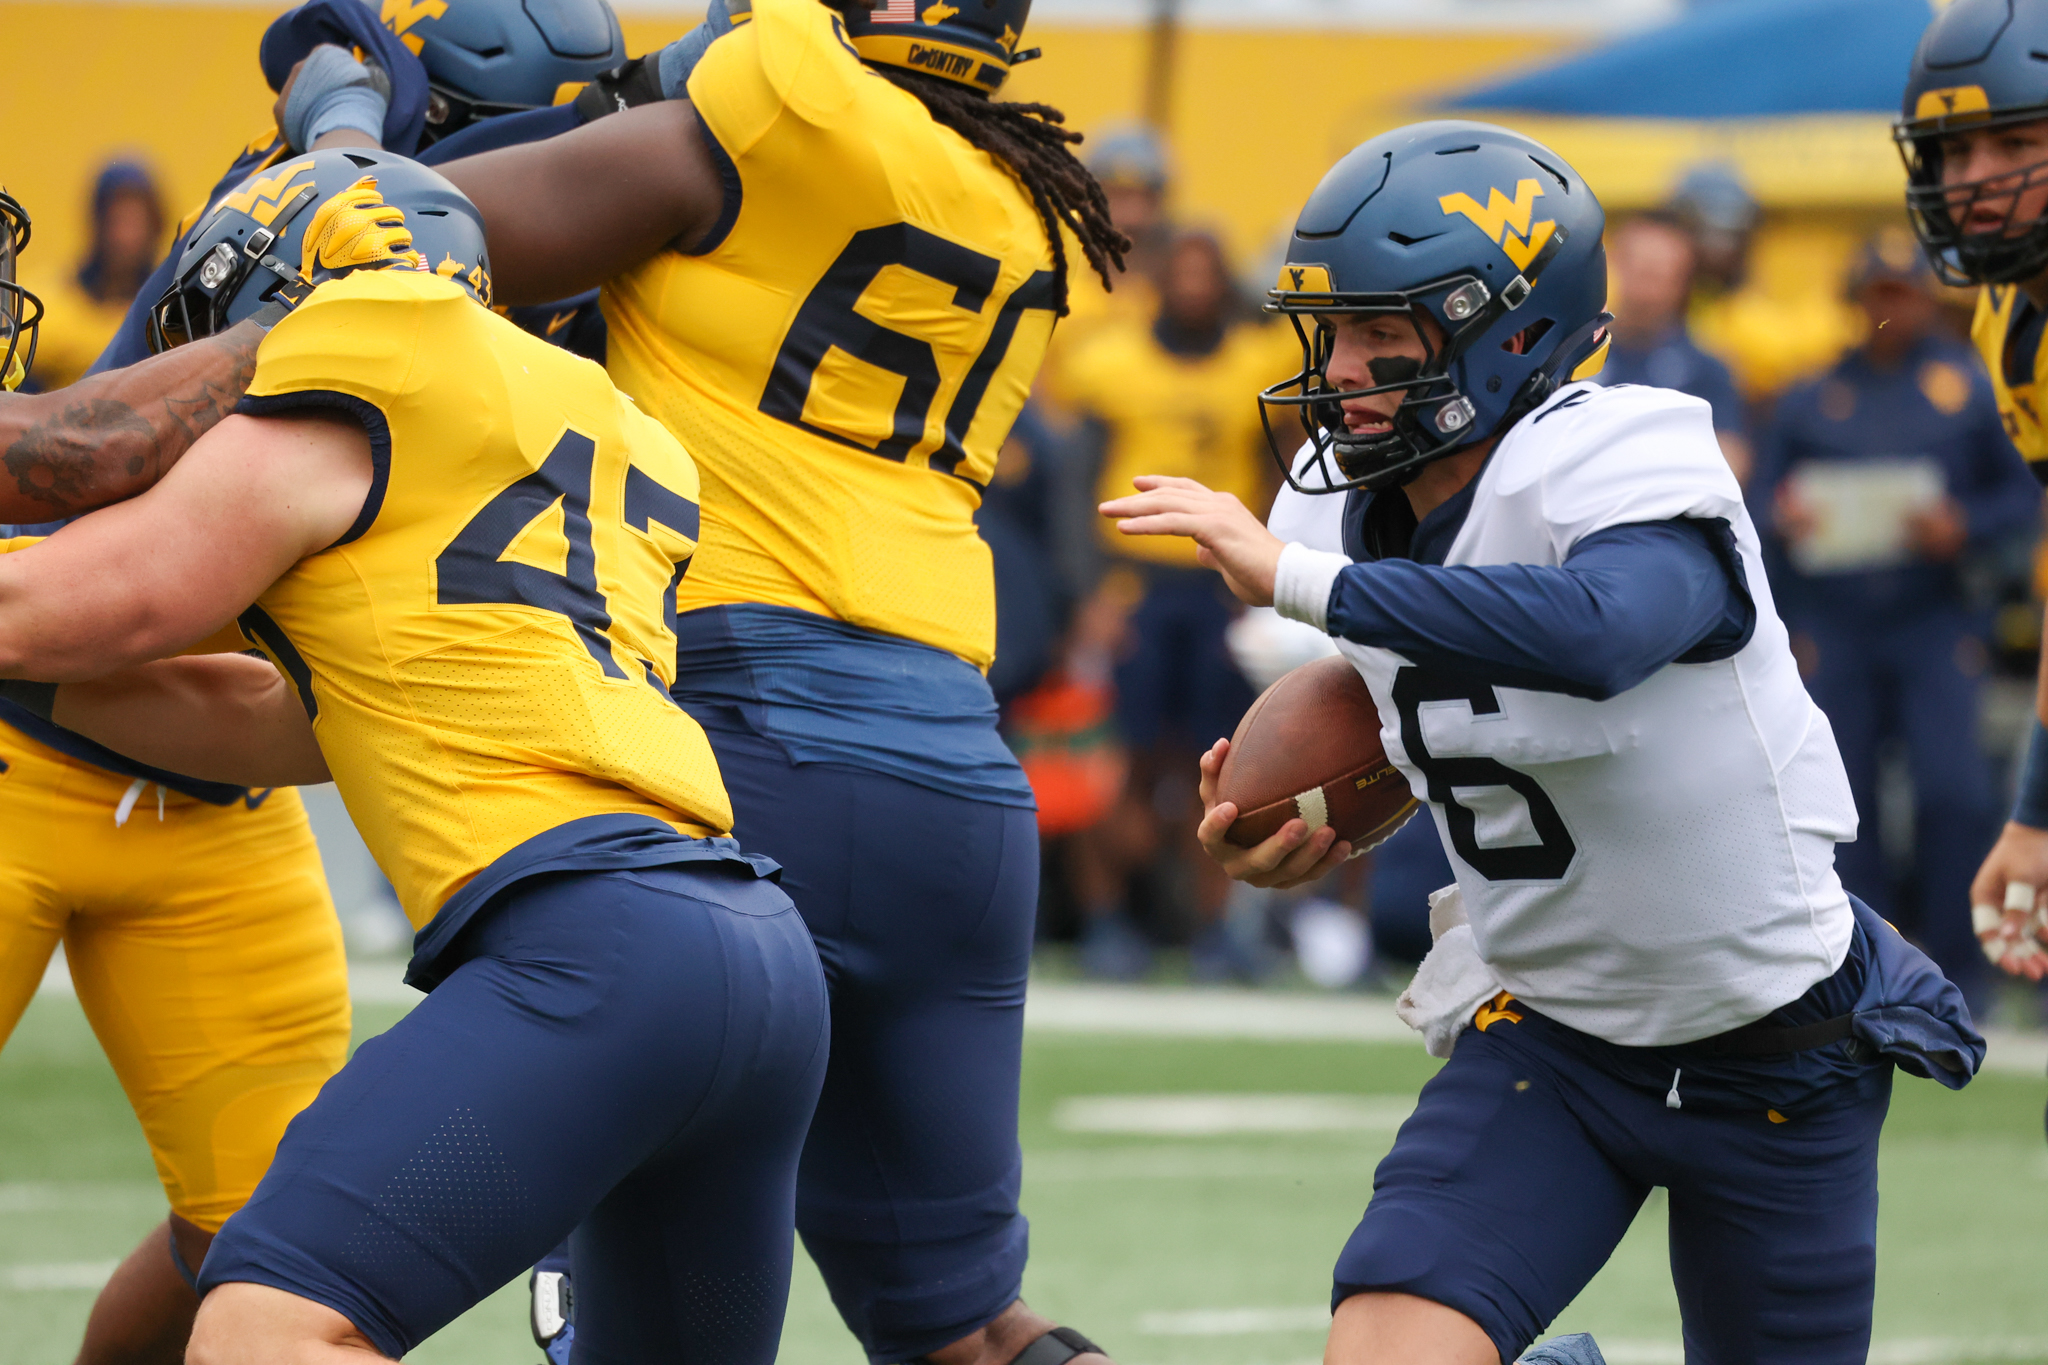 Devin Carter bringing experience and leadership to WVU - Blue Gold Sports